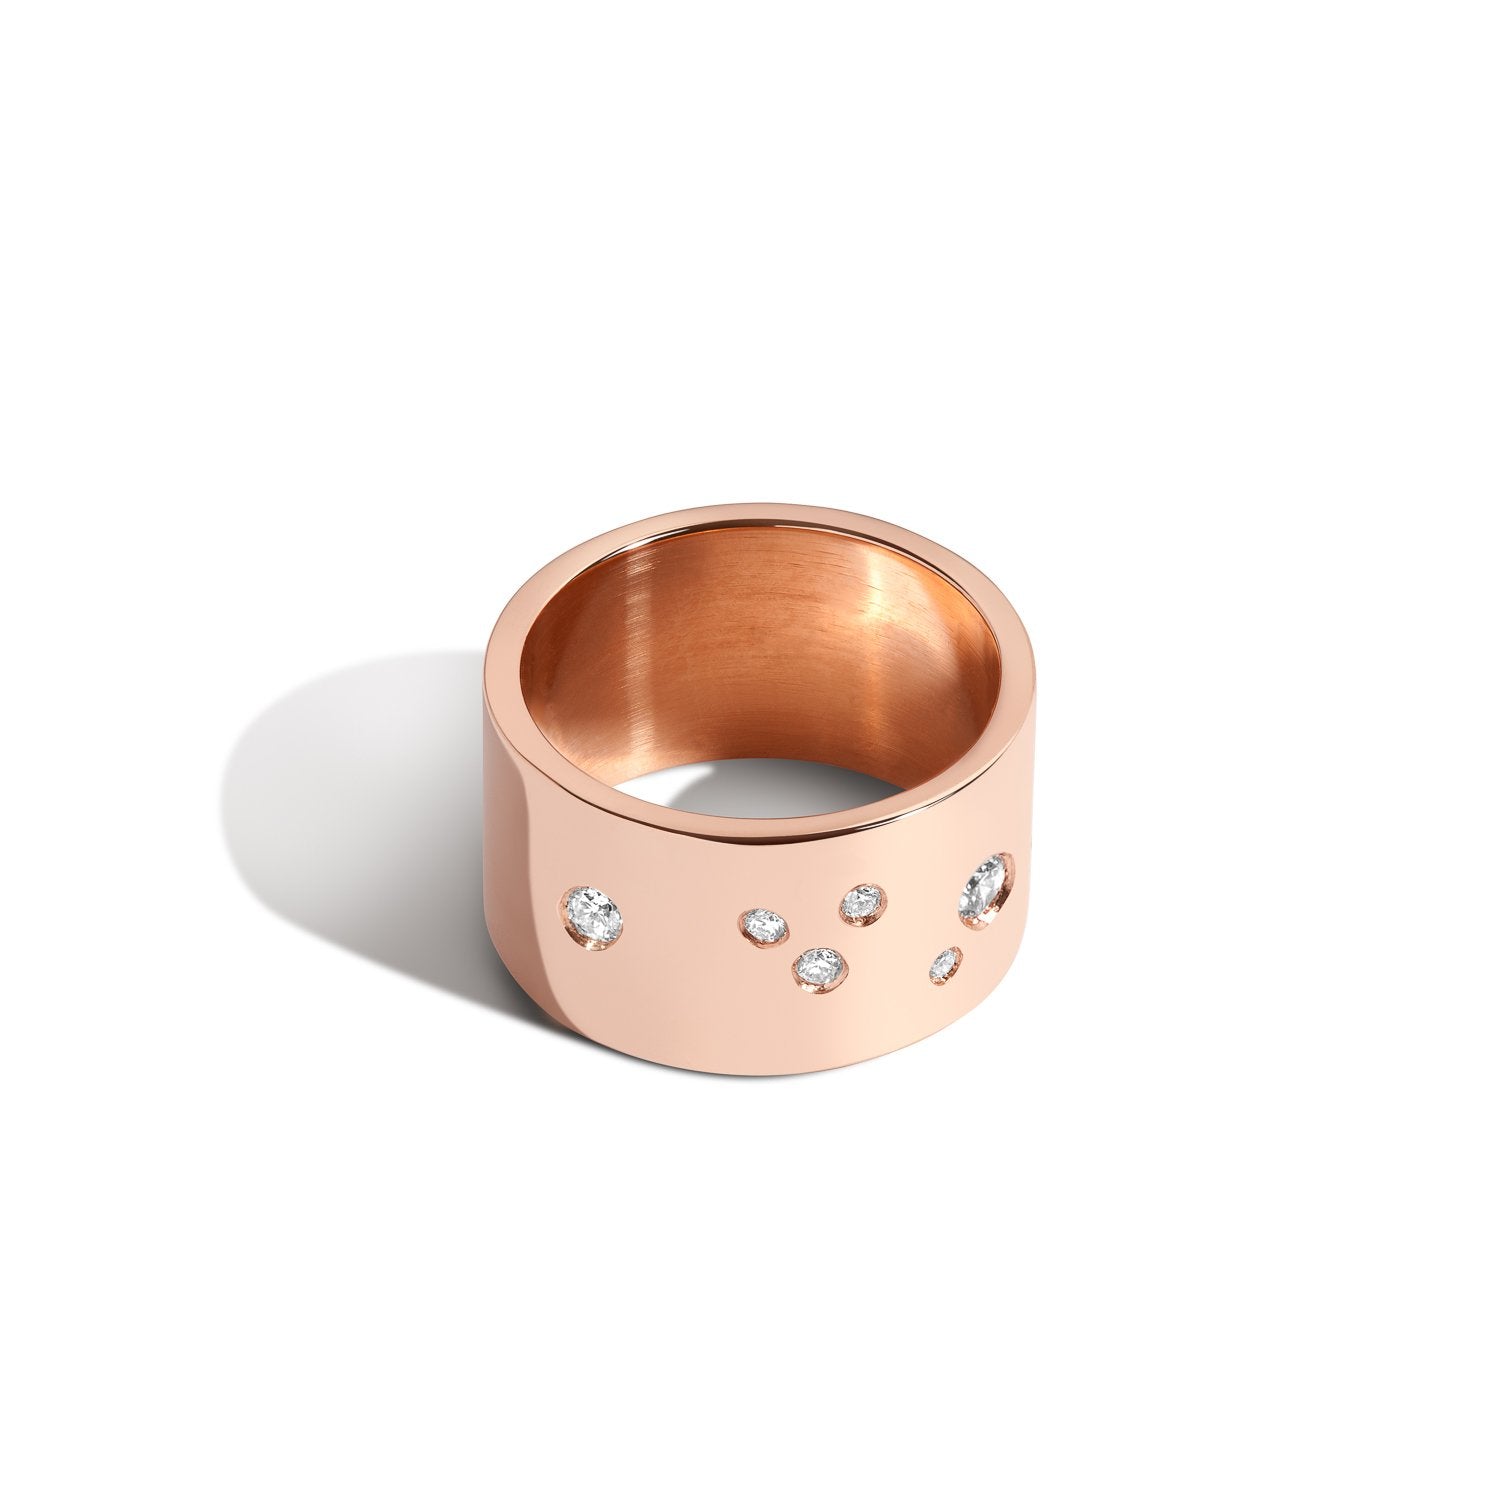 Shahla Karimi Jewelry Zodiac Reveal Ring Collection with White Diamonds - Pisces - 14K Rose Gold - Front View